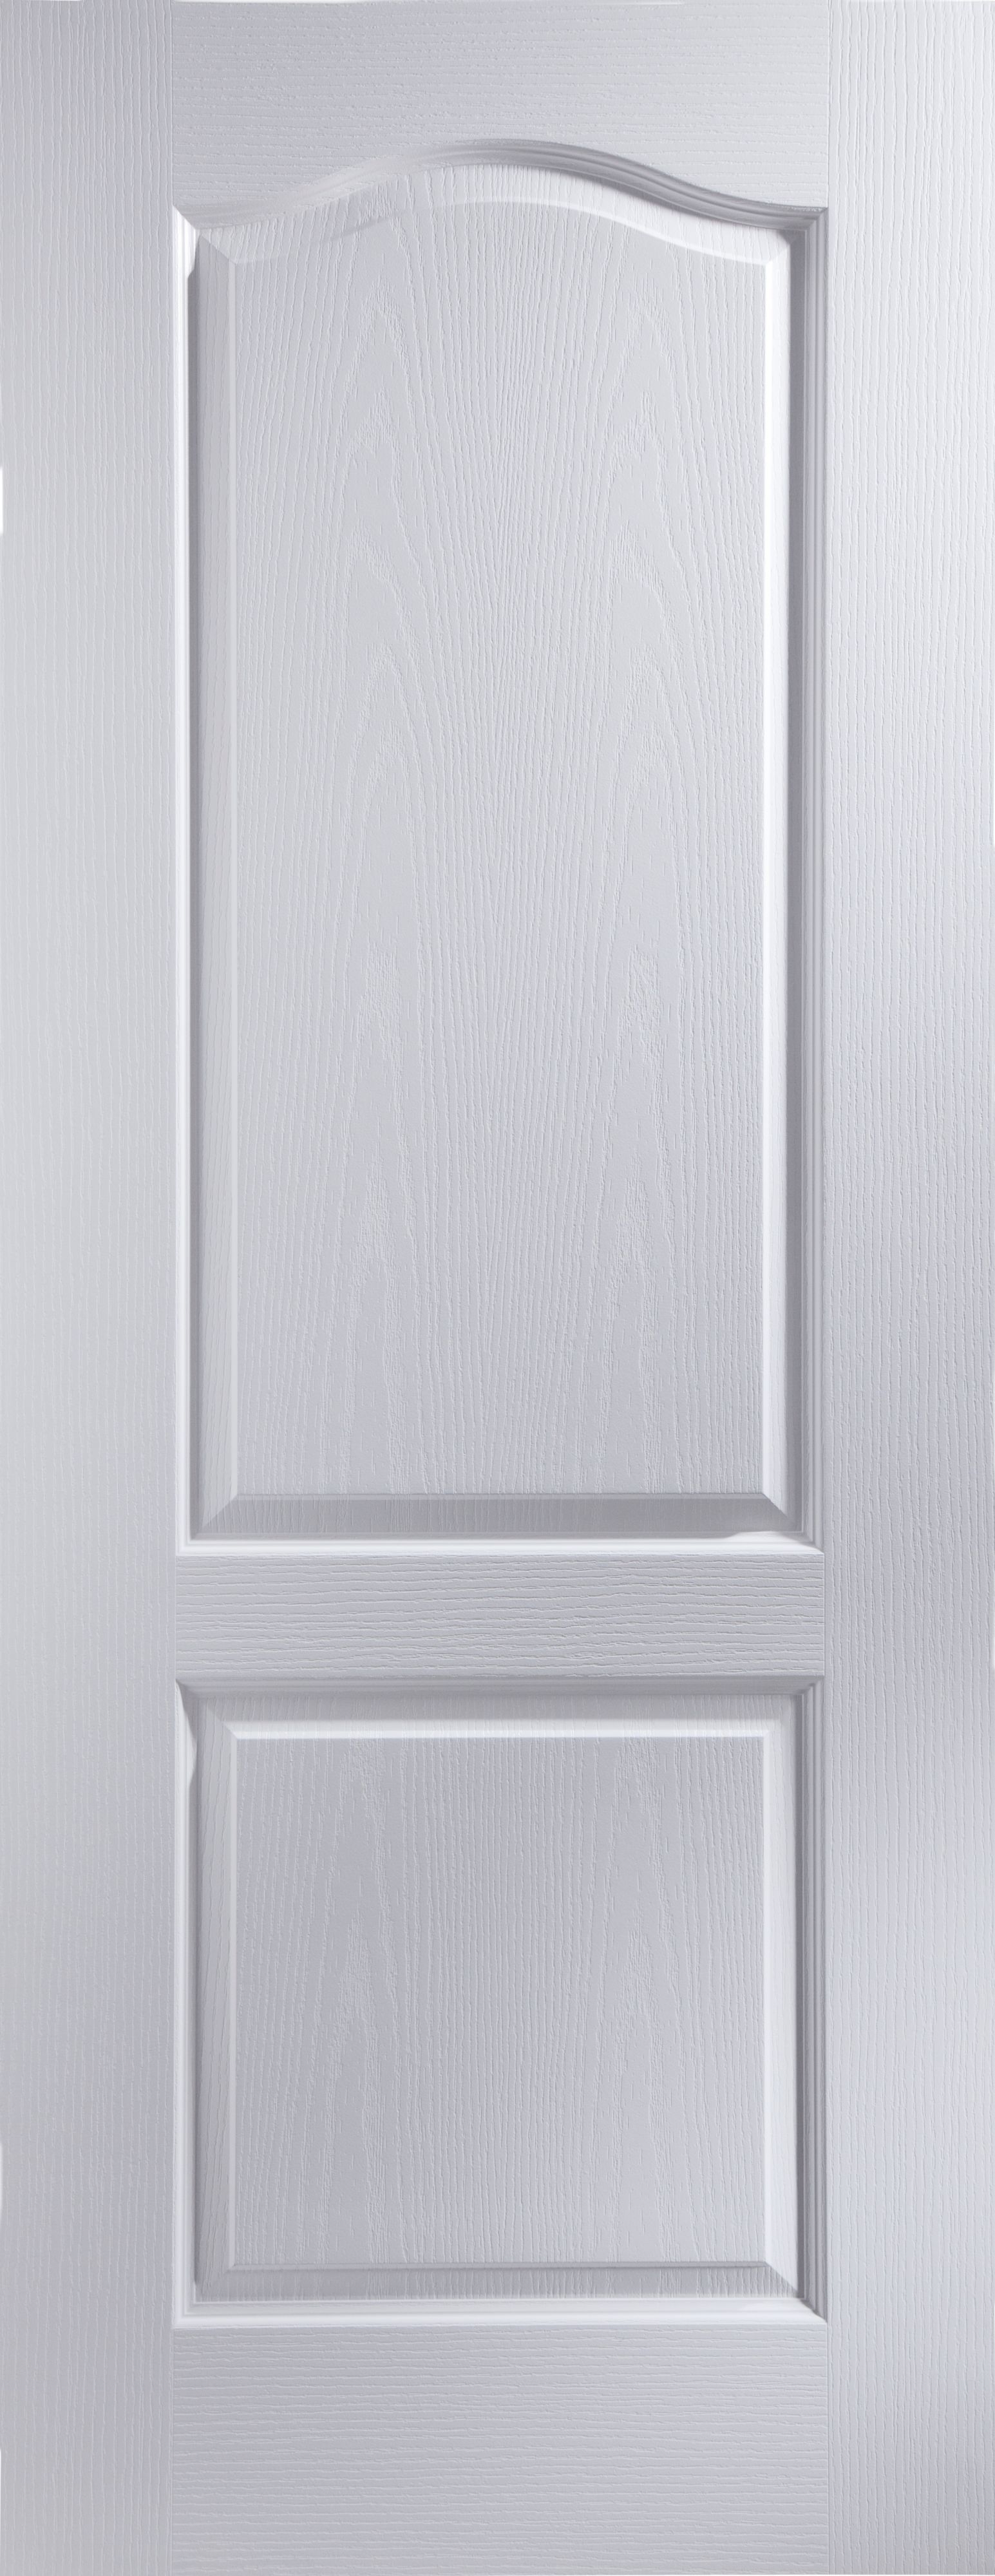 Arched 2 panel Unglazed Arched White Woodgrain effect Internal Door, (H)2032mm (W)813mm (T)35mm